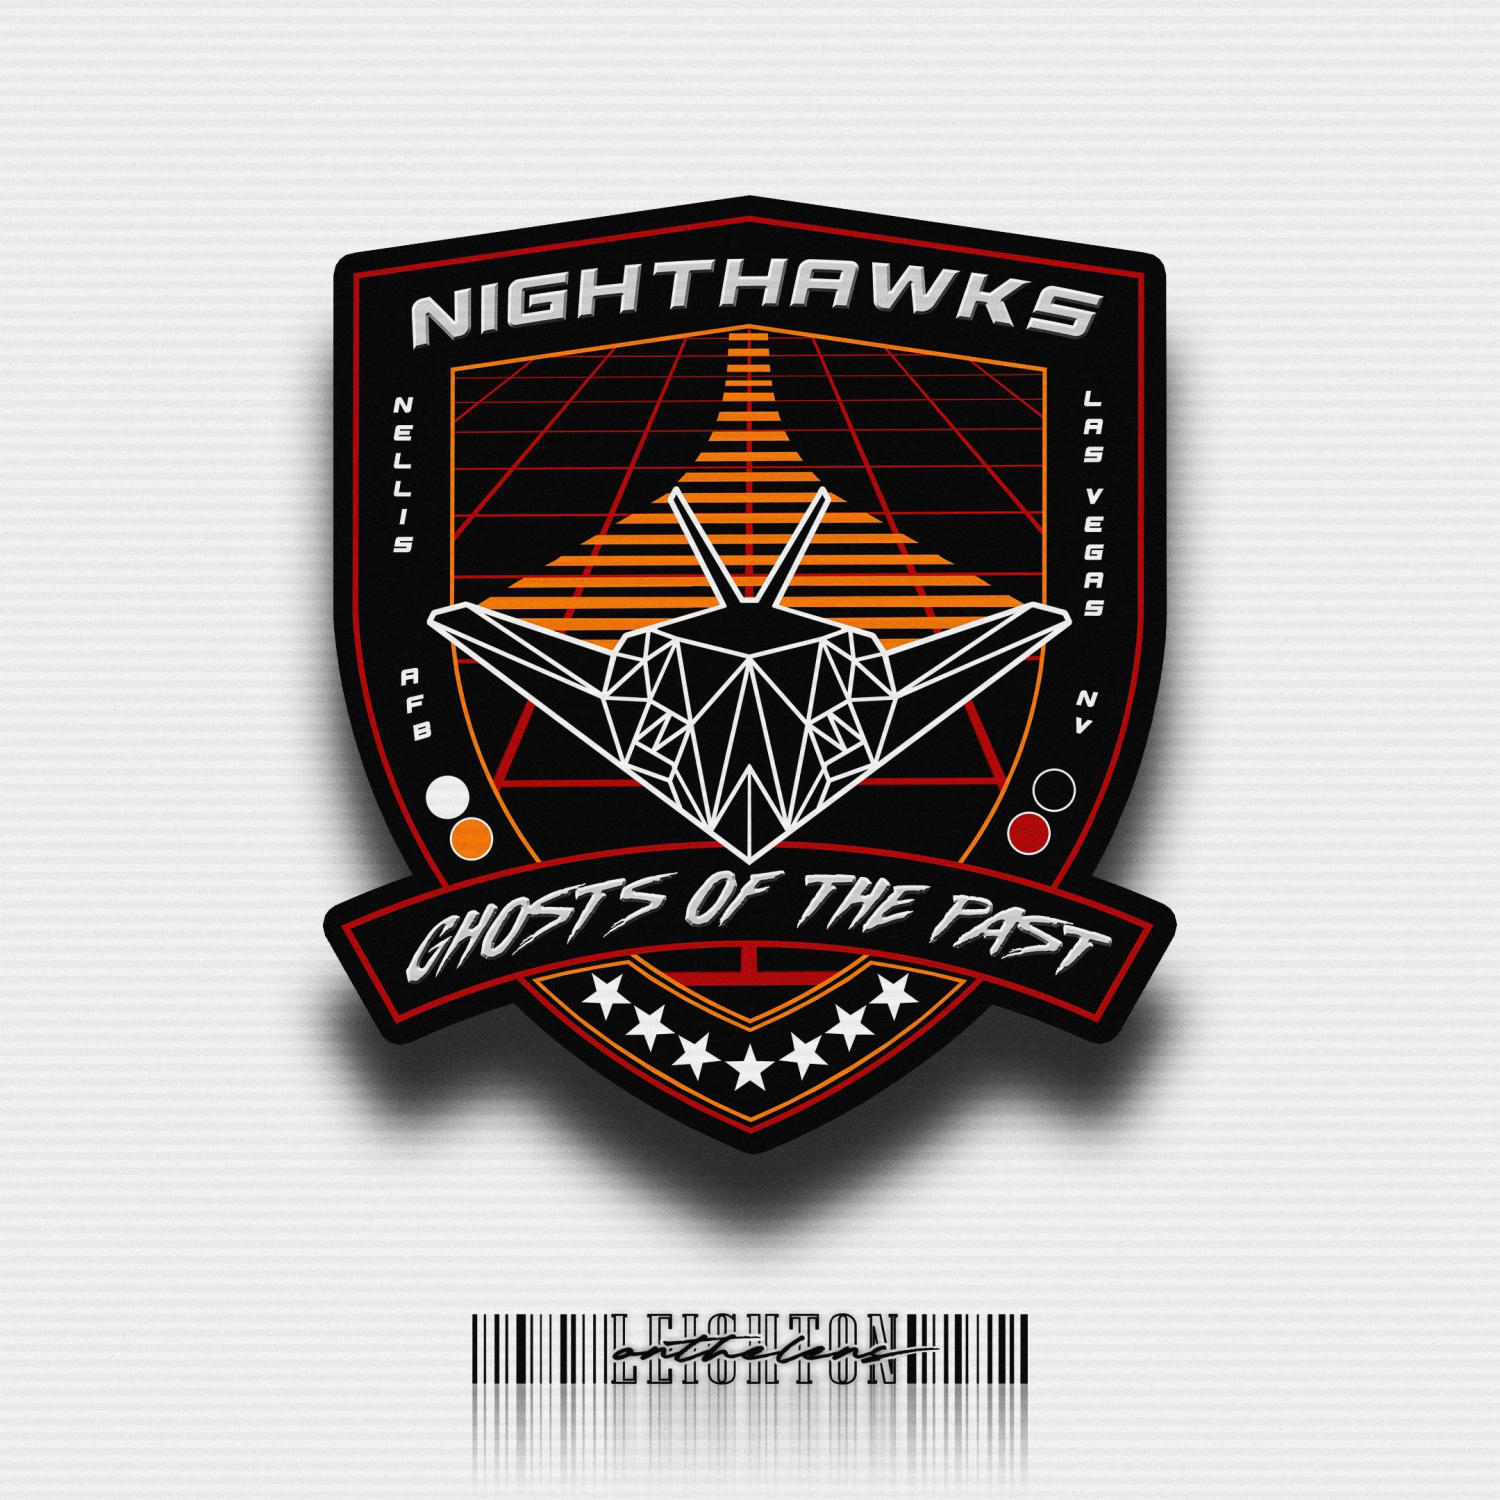 Hey legends, I just finished my very first Outrun Nighthawk patch design. Would you be interested in seeing more in this style? Cheers!